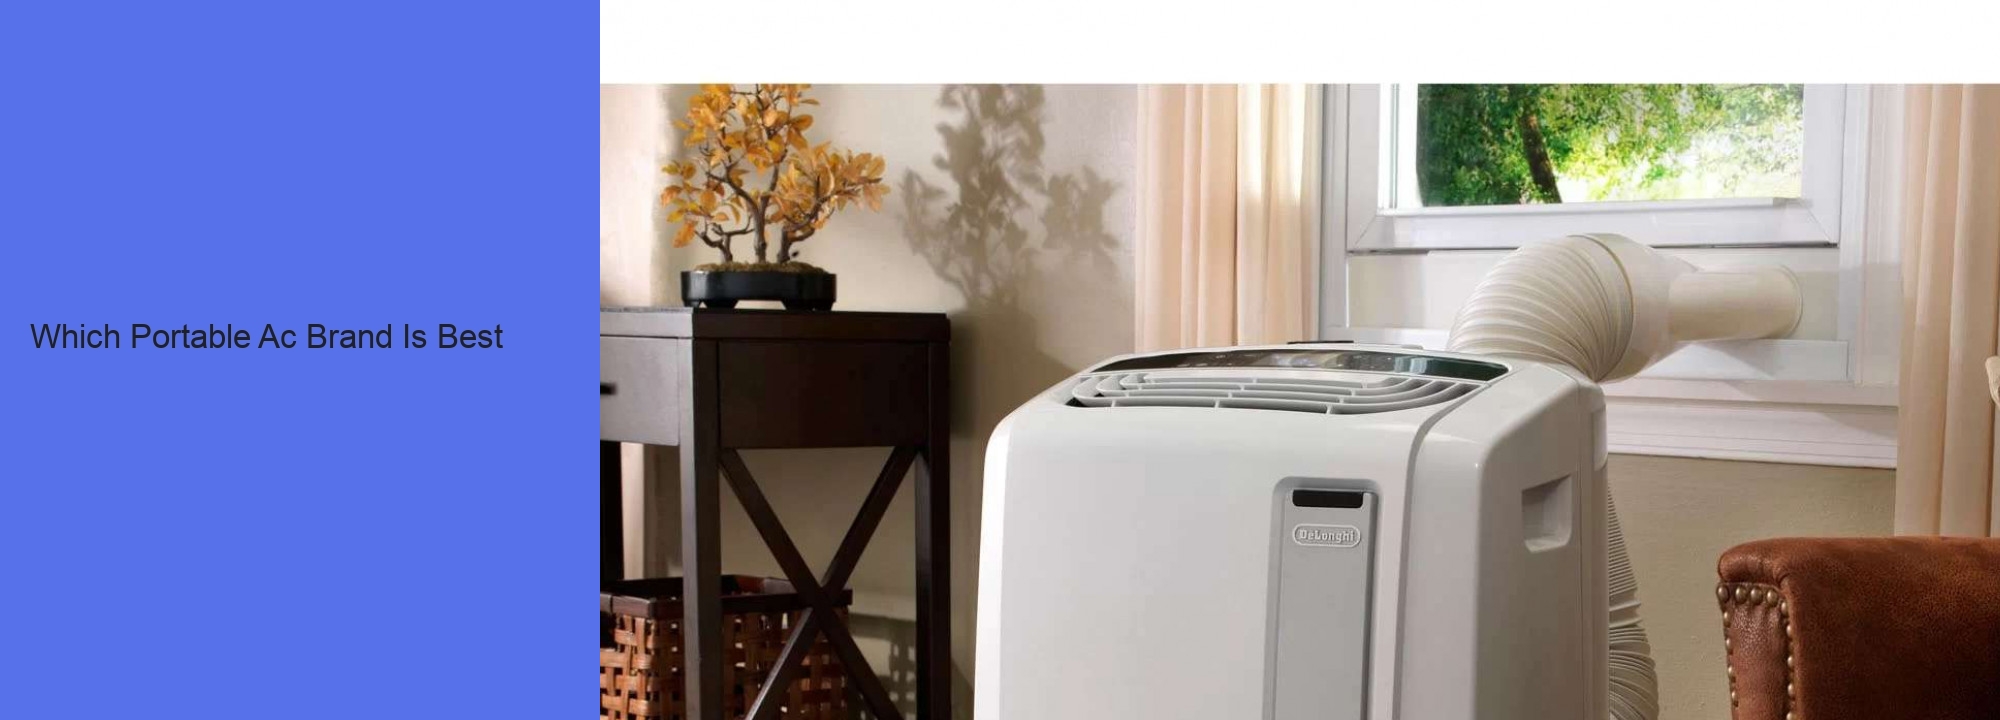 Which Portable Ac Brand Is Best